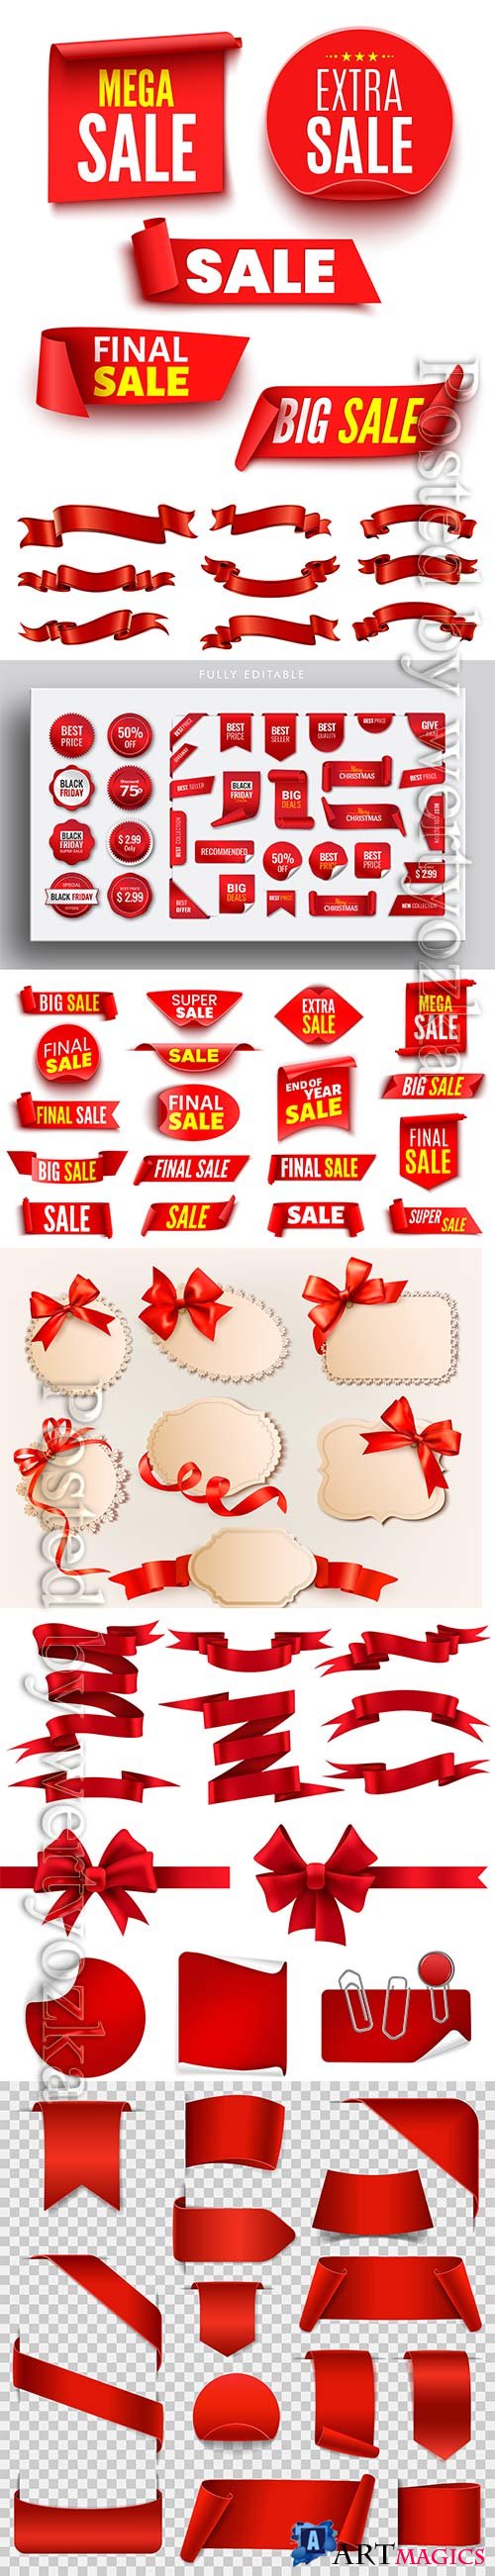 Red ribbon collection pack for event banners and price tag badges